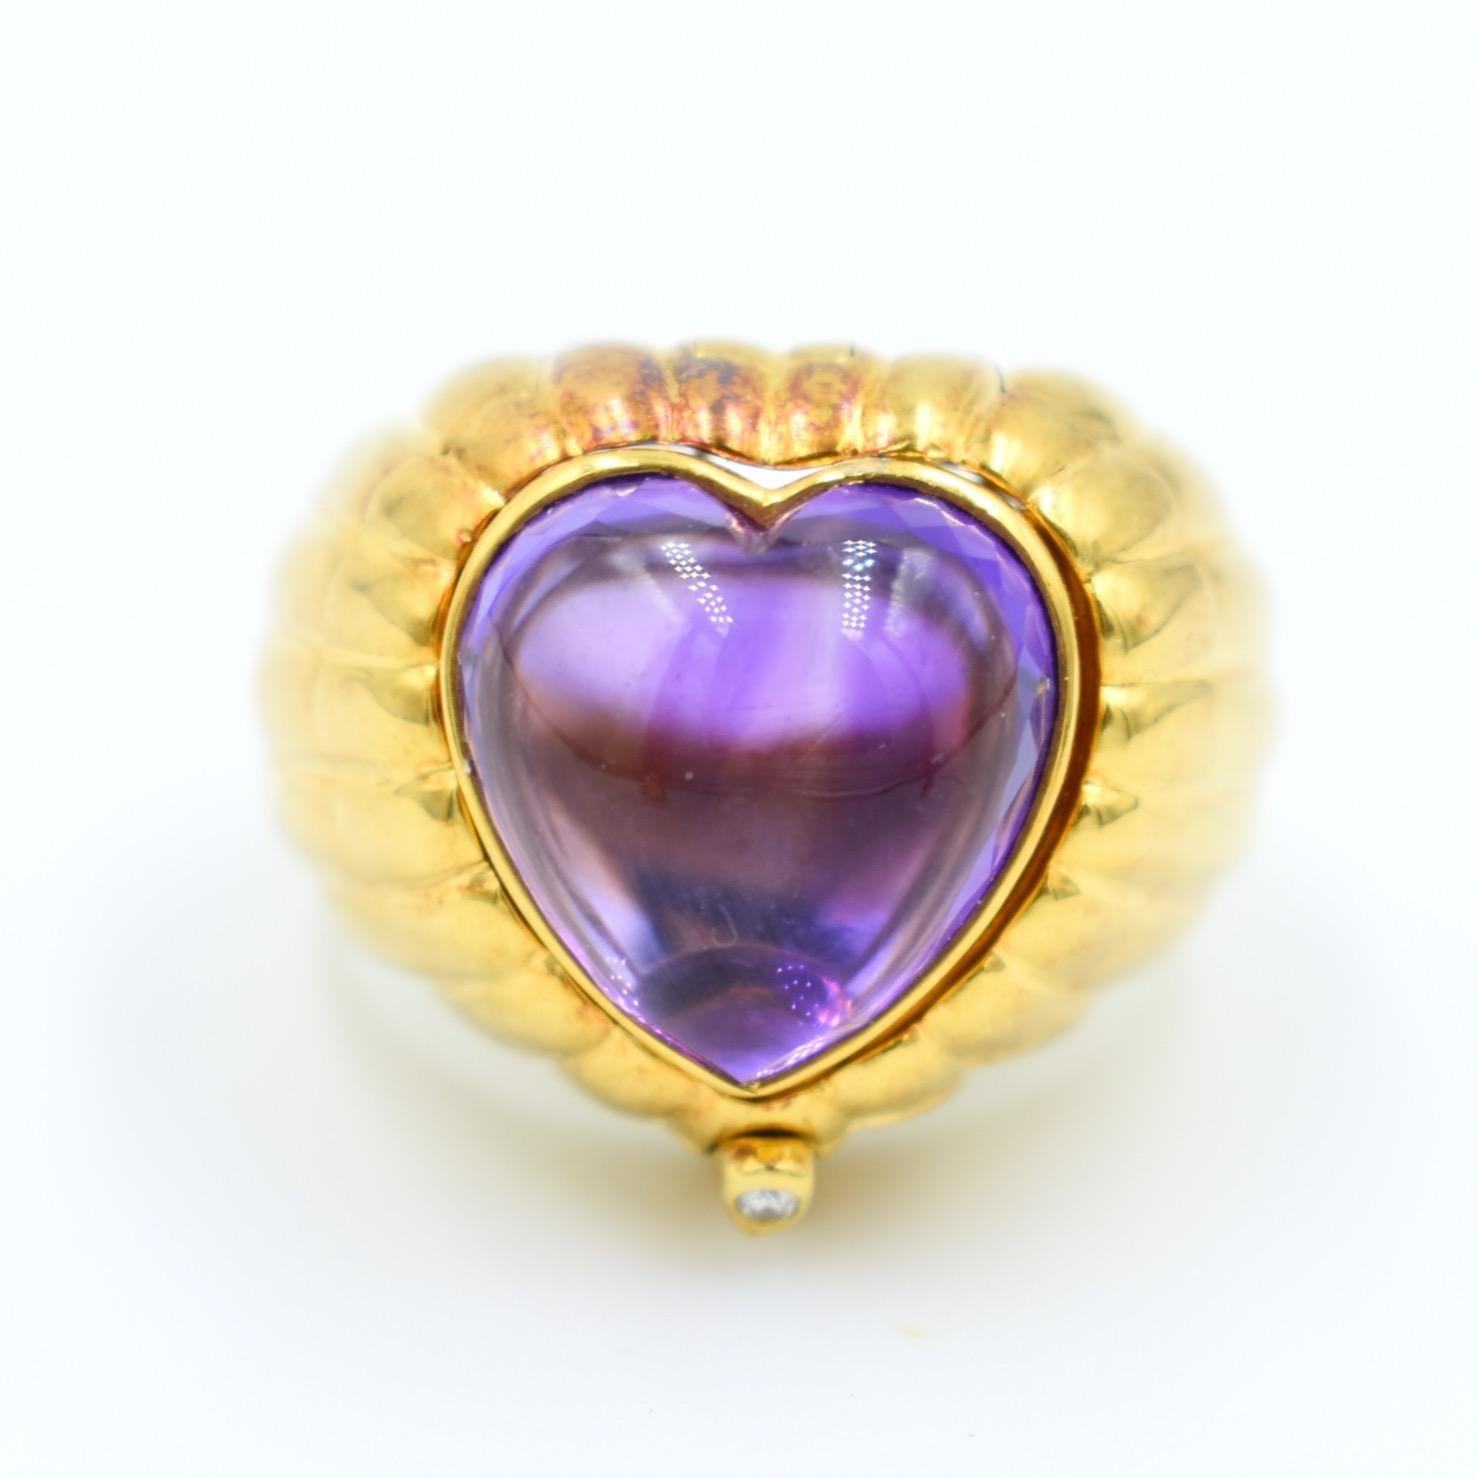 Modular 3-in-1 Heart Ring in Gold with Amethyst, Citrine, Tourmaline Cabochons In Good Condition For Sale In PARIS, FR